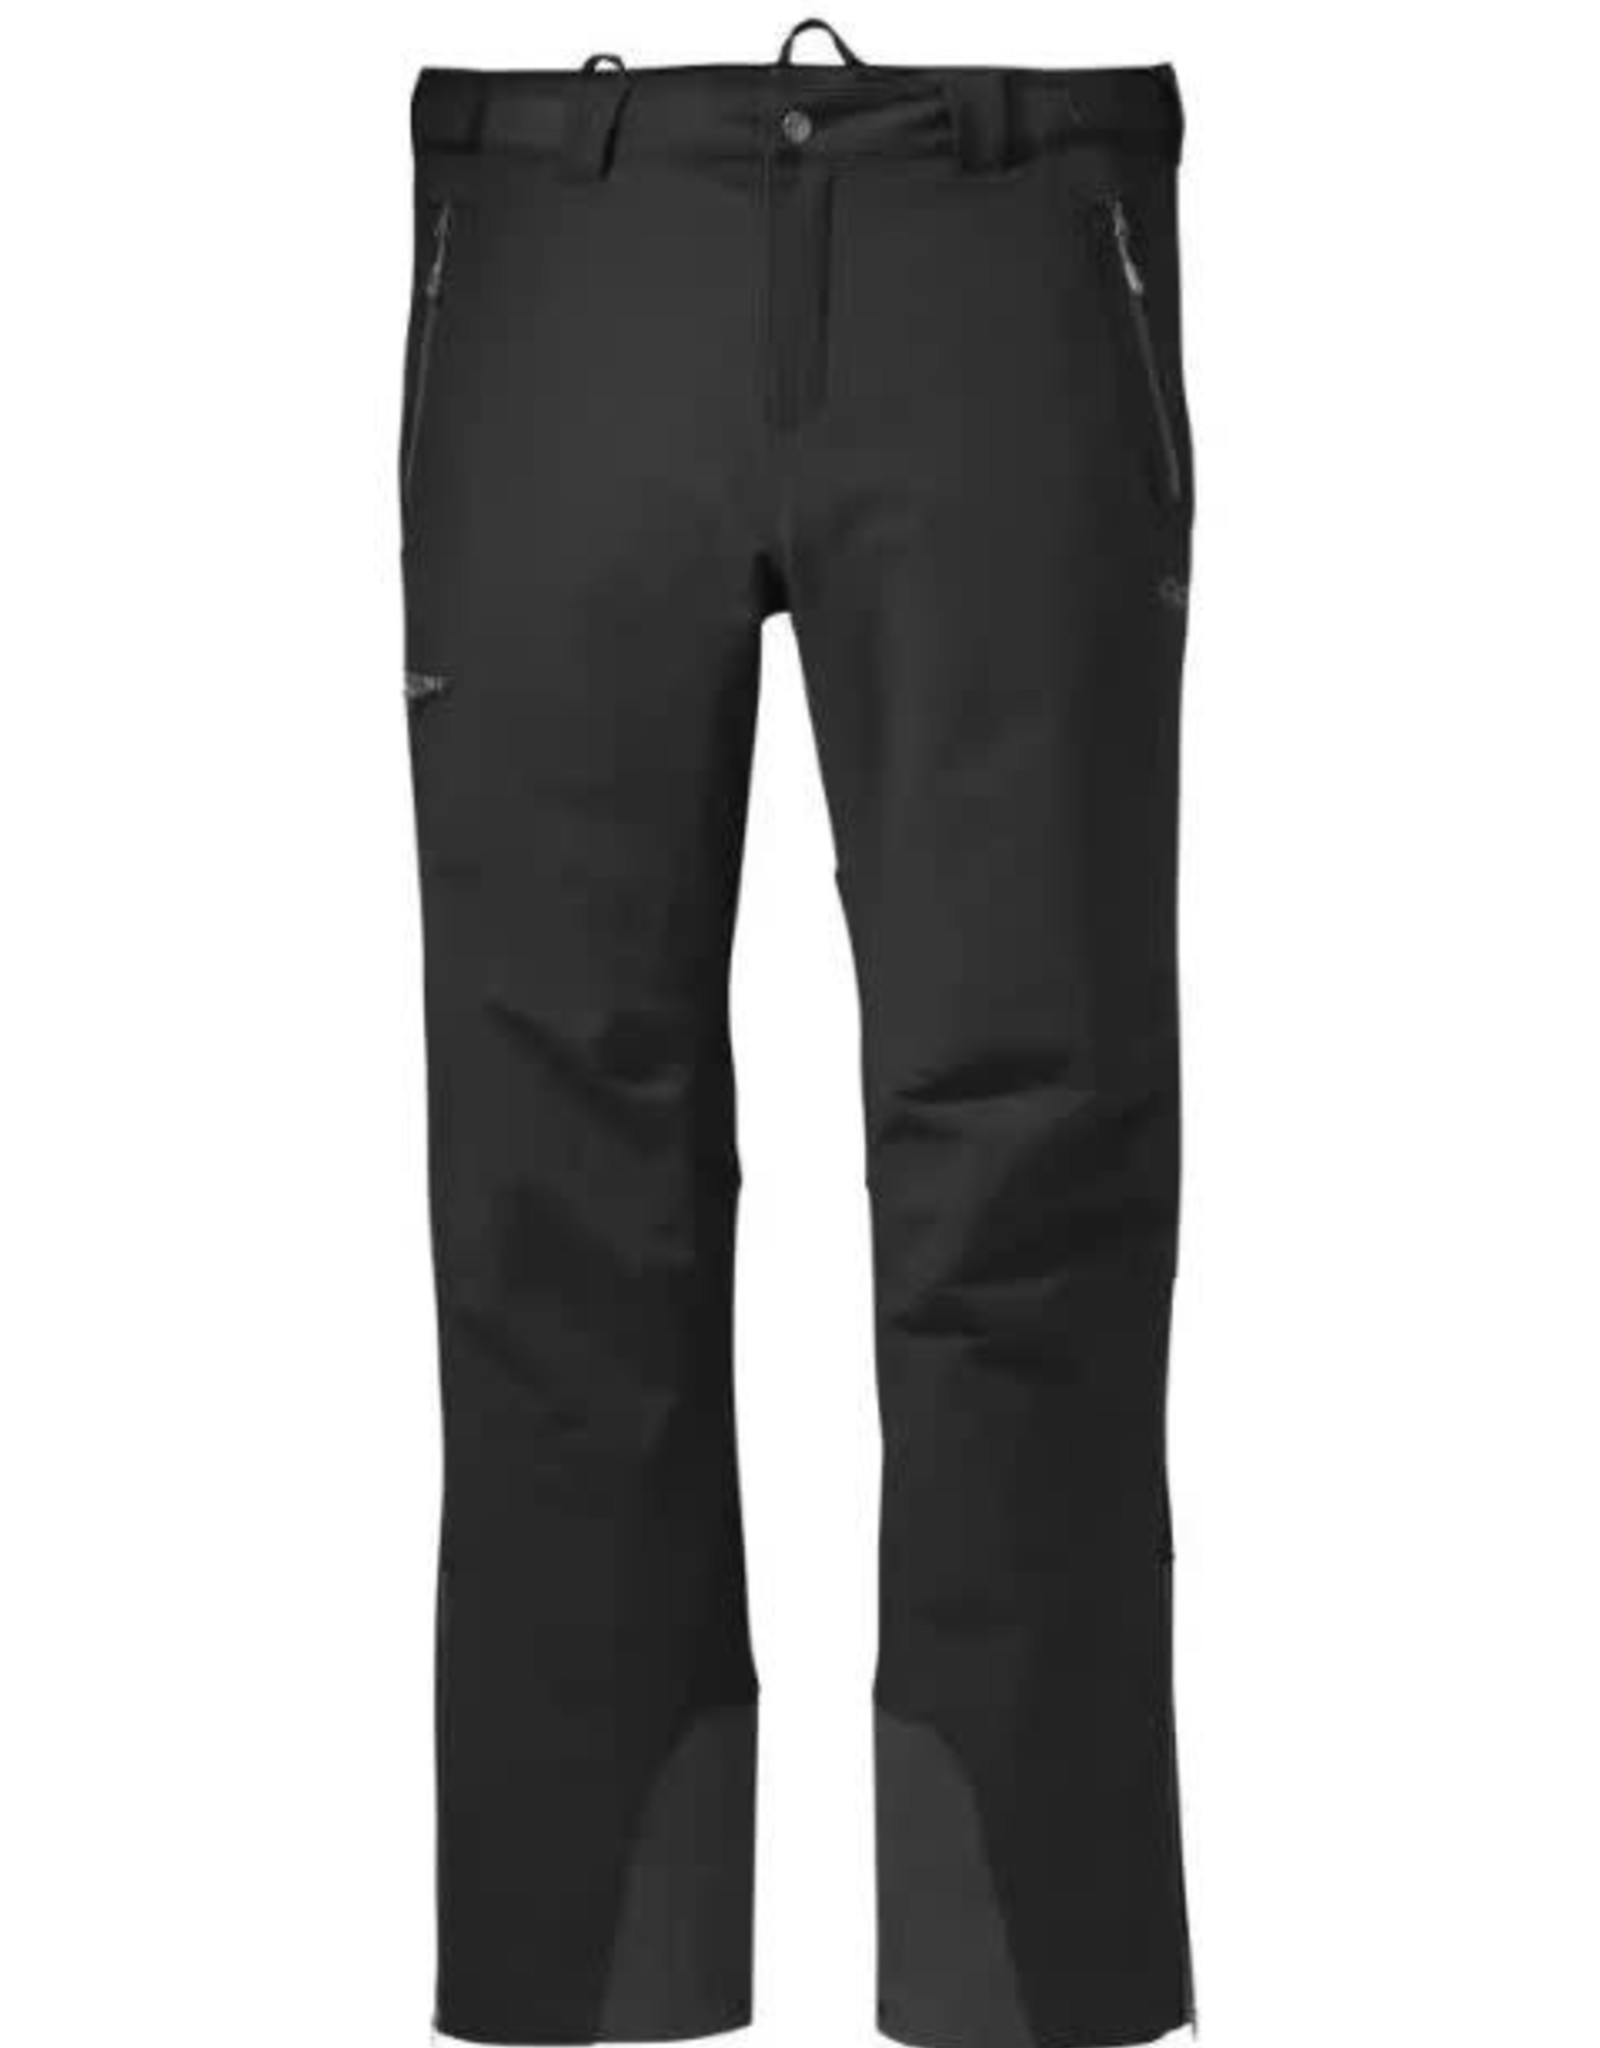 OUTDOOR RESEARCH CIRQUE II PANT